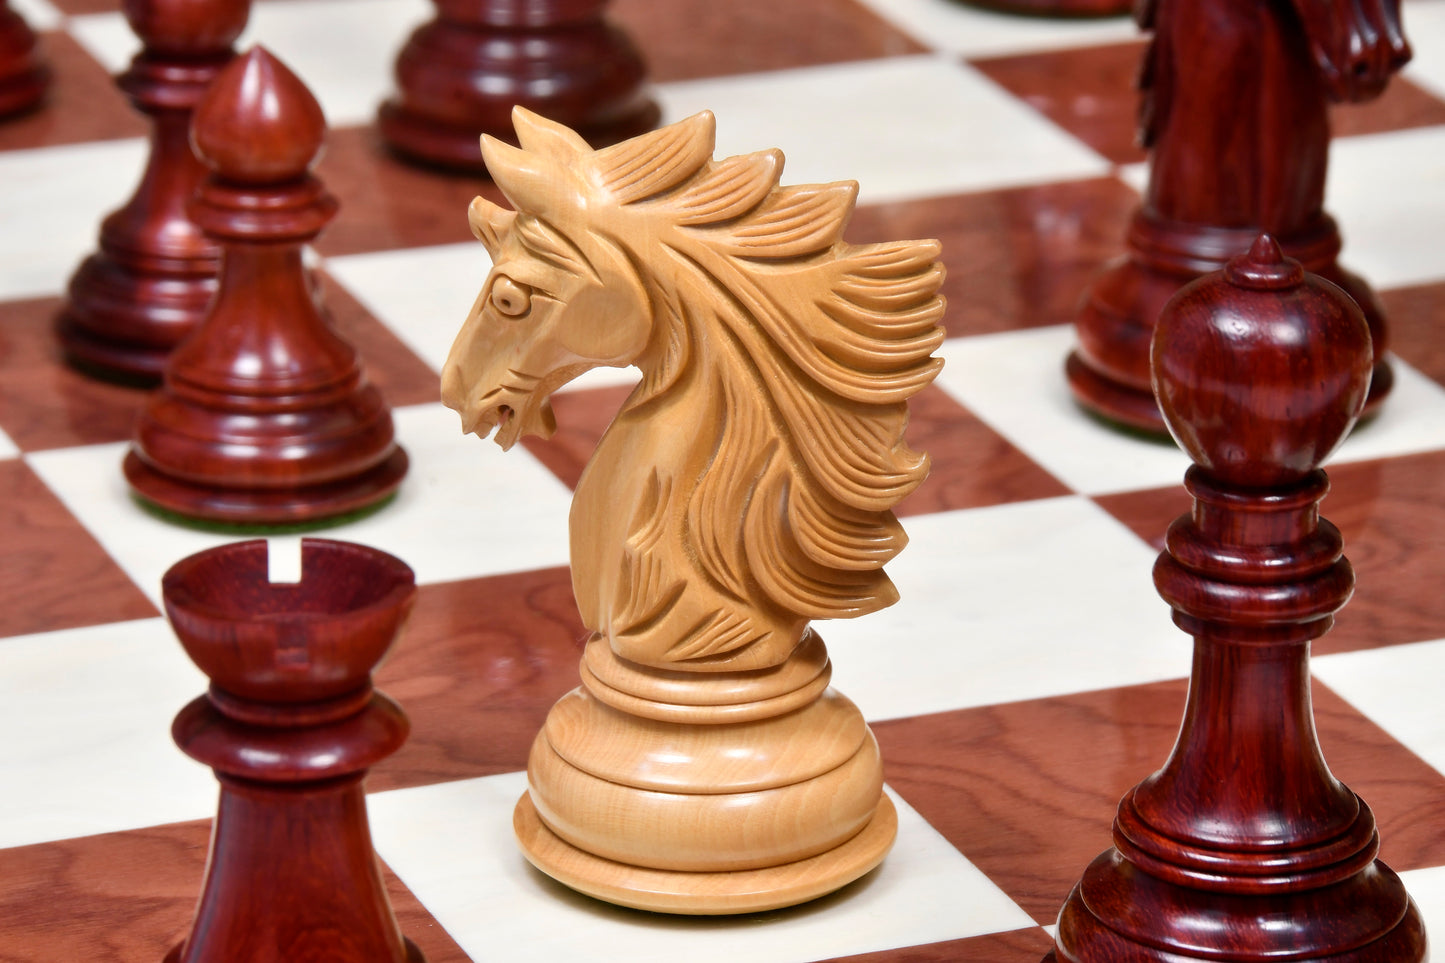 The Sher-E-Punjab Series Chess Pieces in Bud Rose Wood / Box Wood - 4.6" King